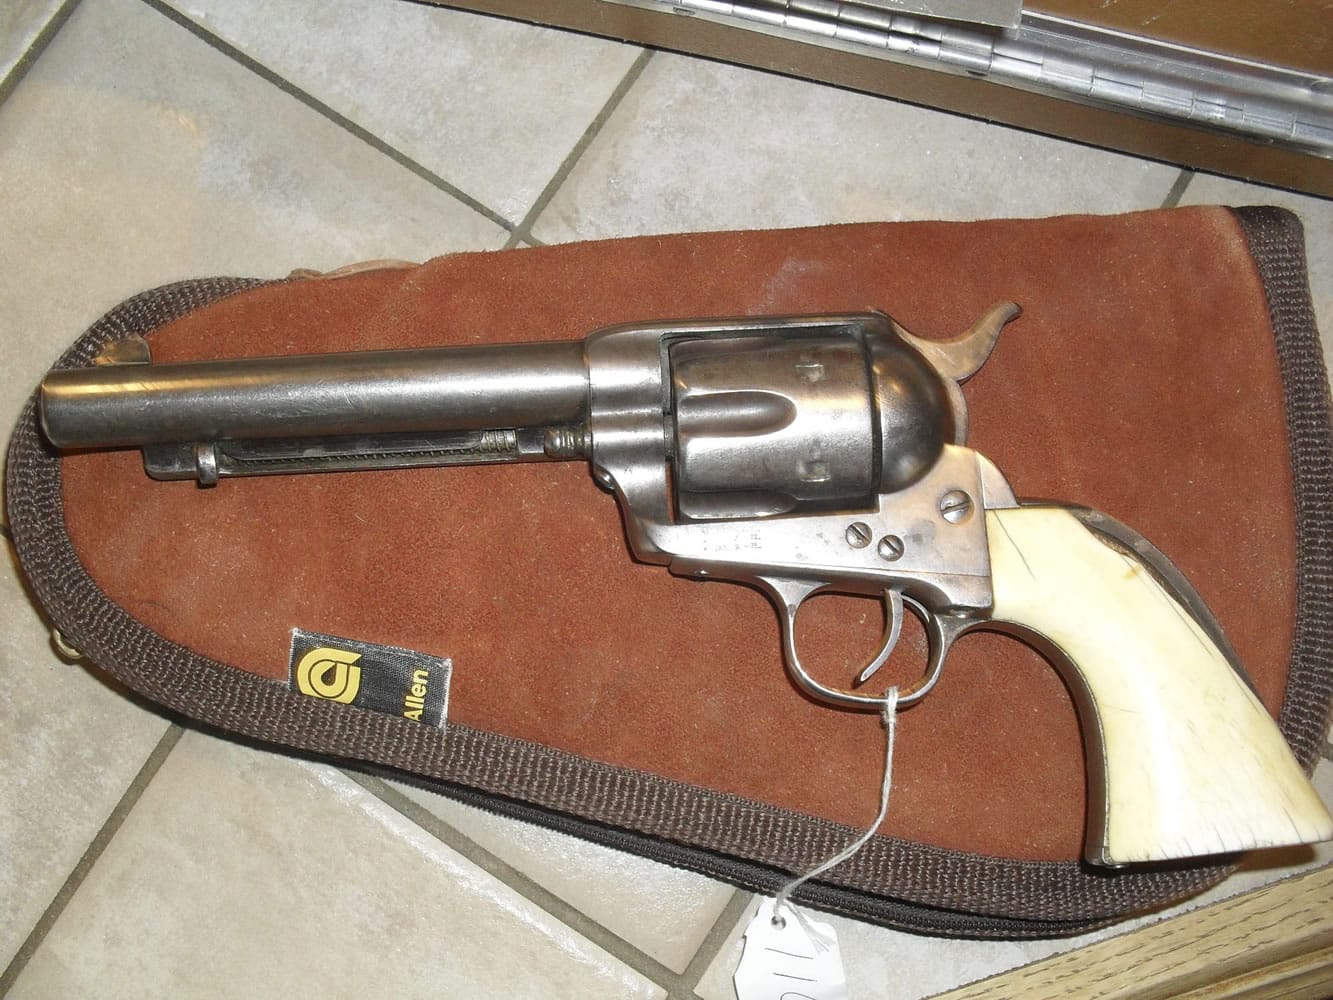 Mitch Powers got a call from the History Channel show &quot;Pawn Stars&quot; about this 1889 Colt revolver that his father, Dale, owned.